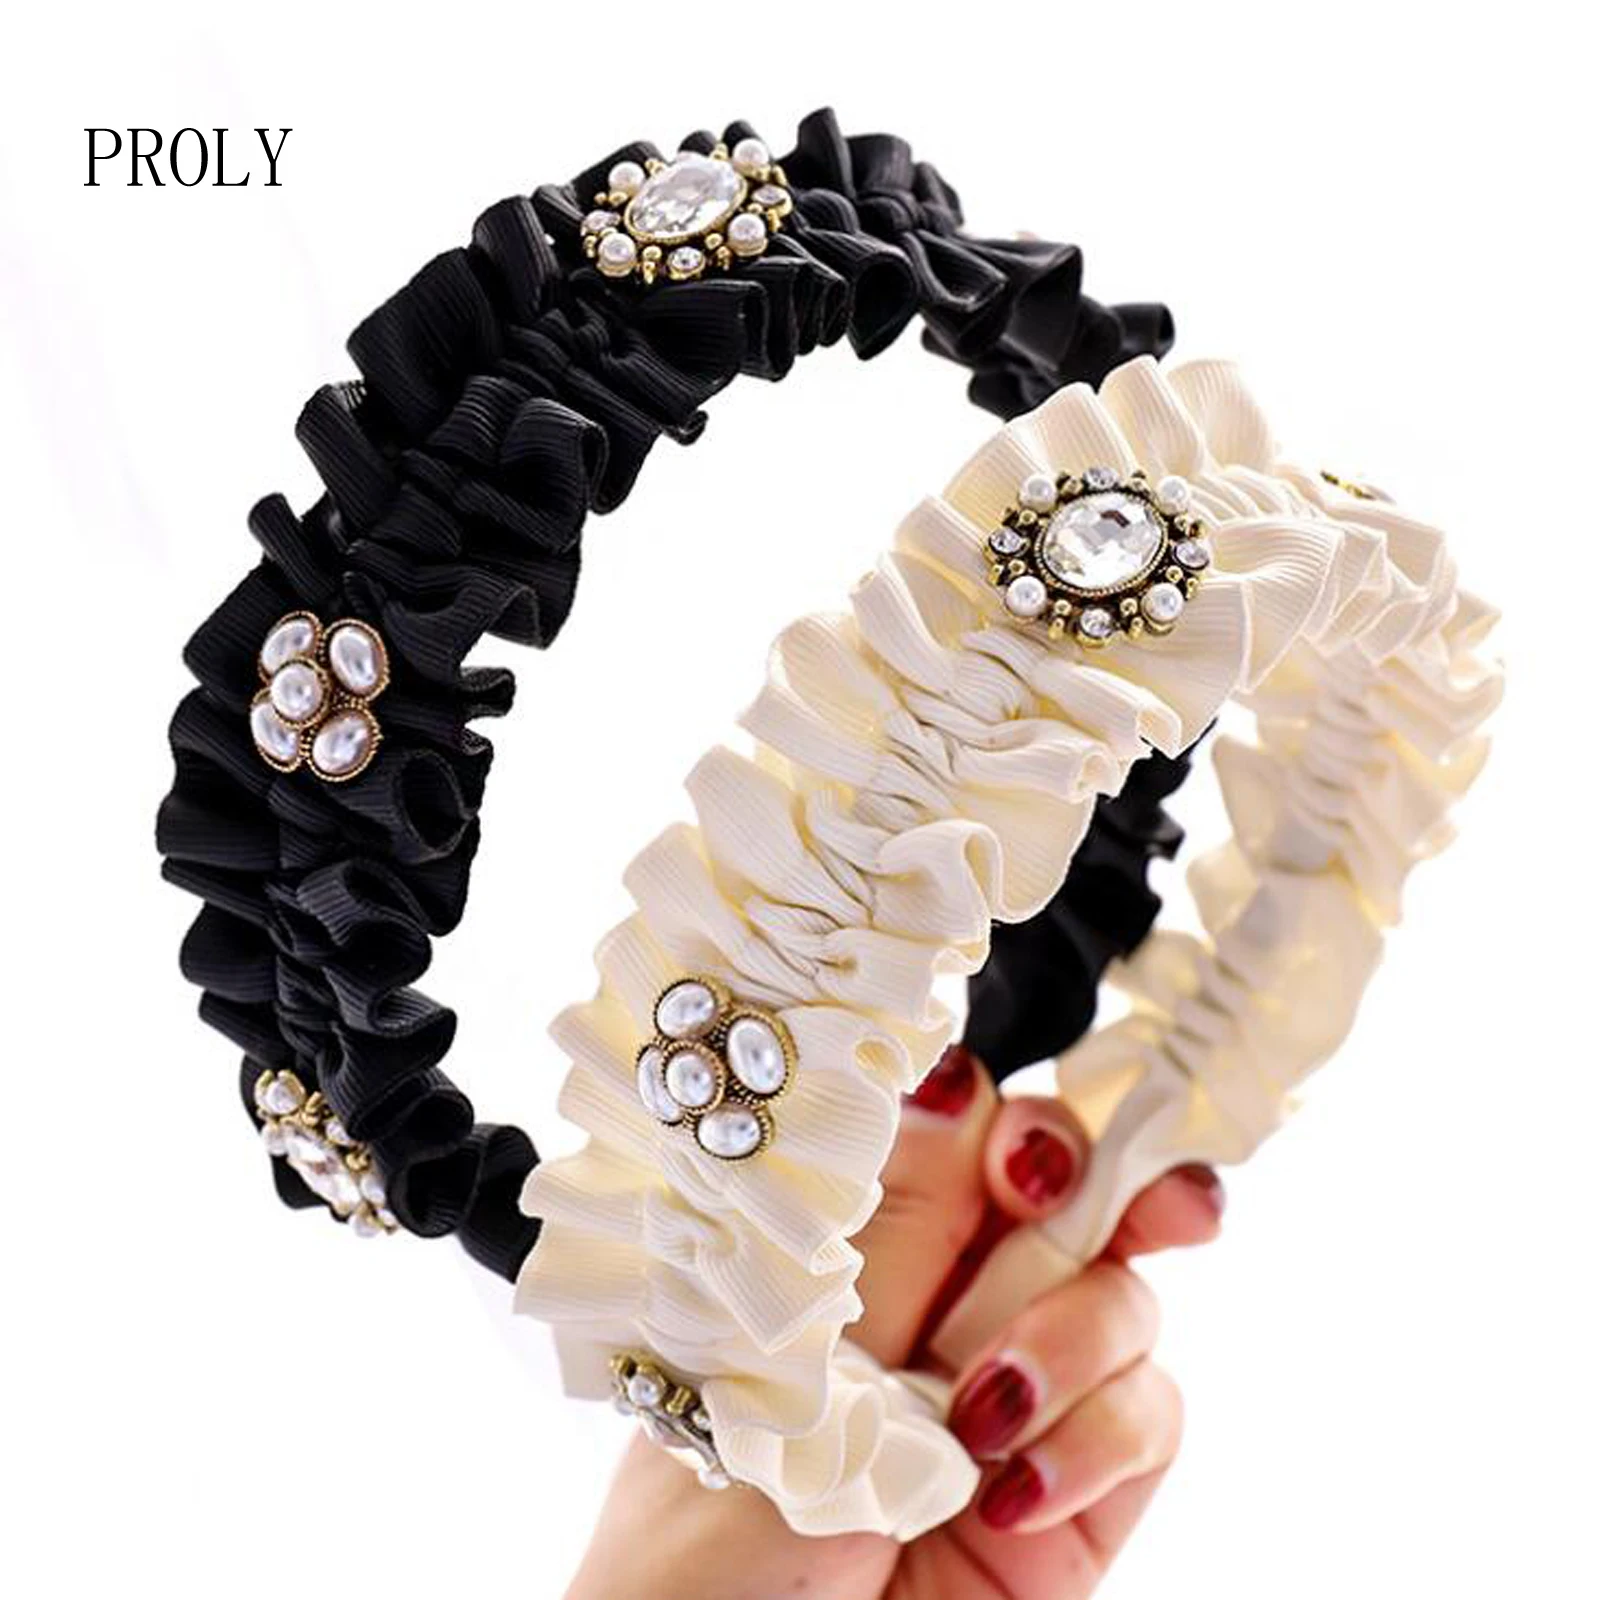 PROLY New Fashion Hair Accessories For Women Leather Hairband Cross Knot Braid Headband Adult Wide Side Headwear Hair Hoop hair clips for women